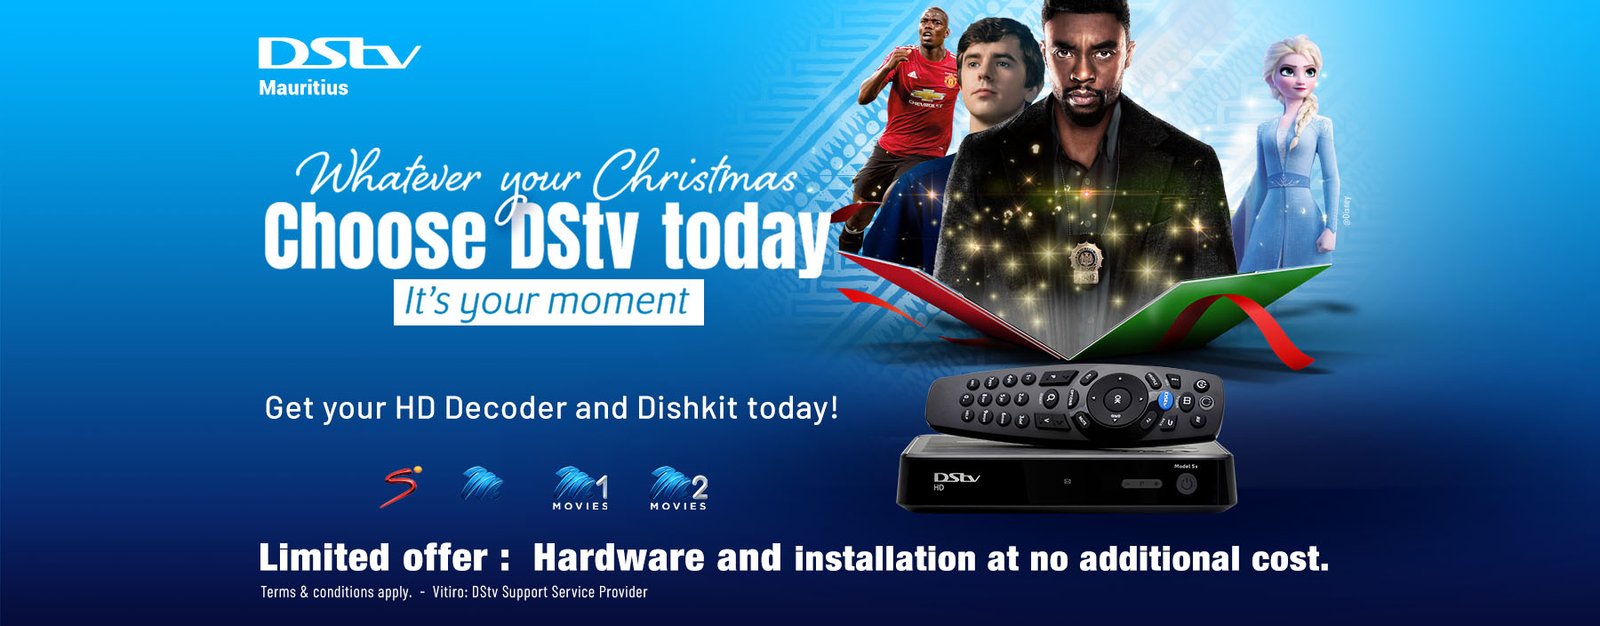 DSTV PACKAGES and Bouquets Prices in Nigeria